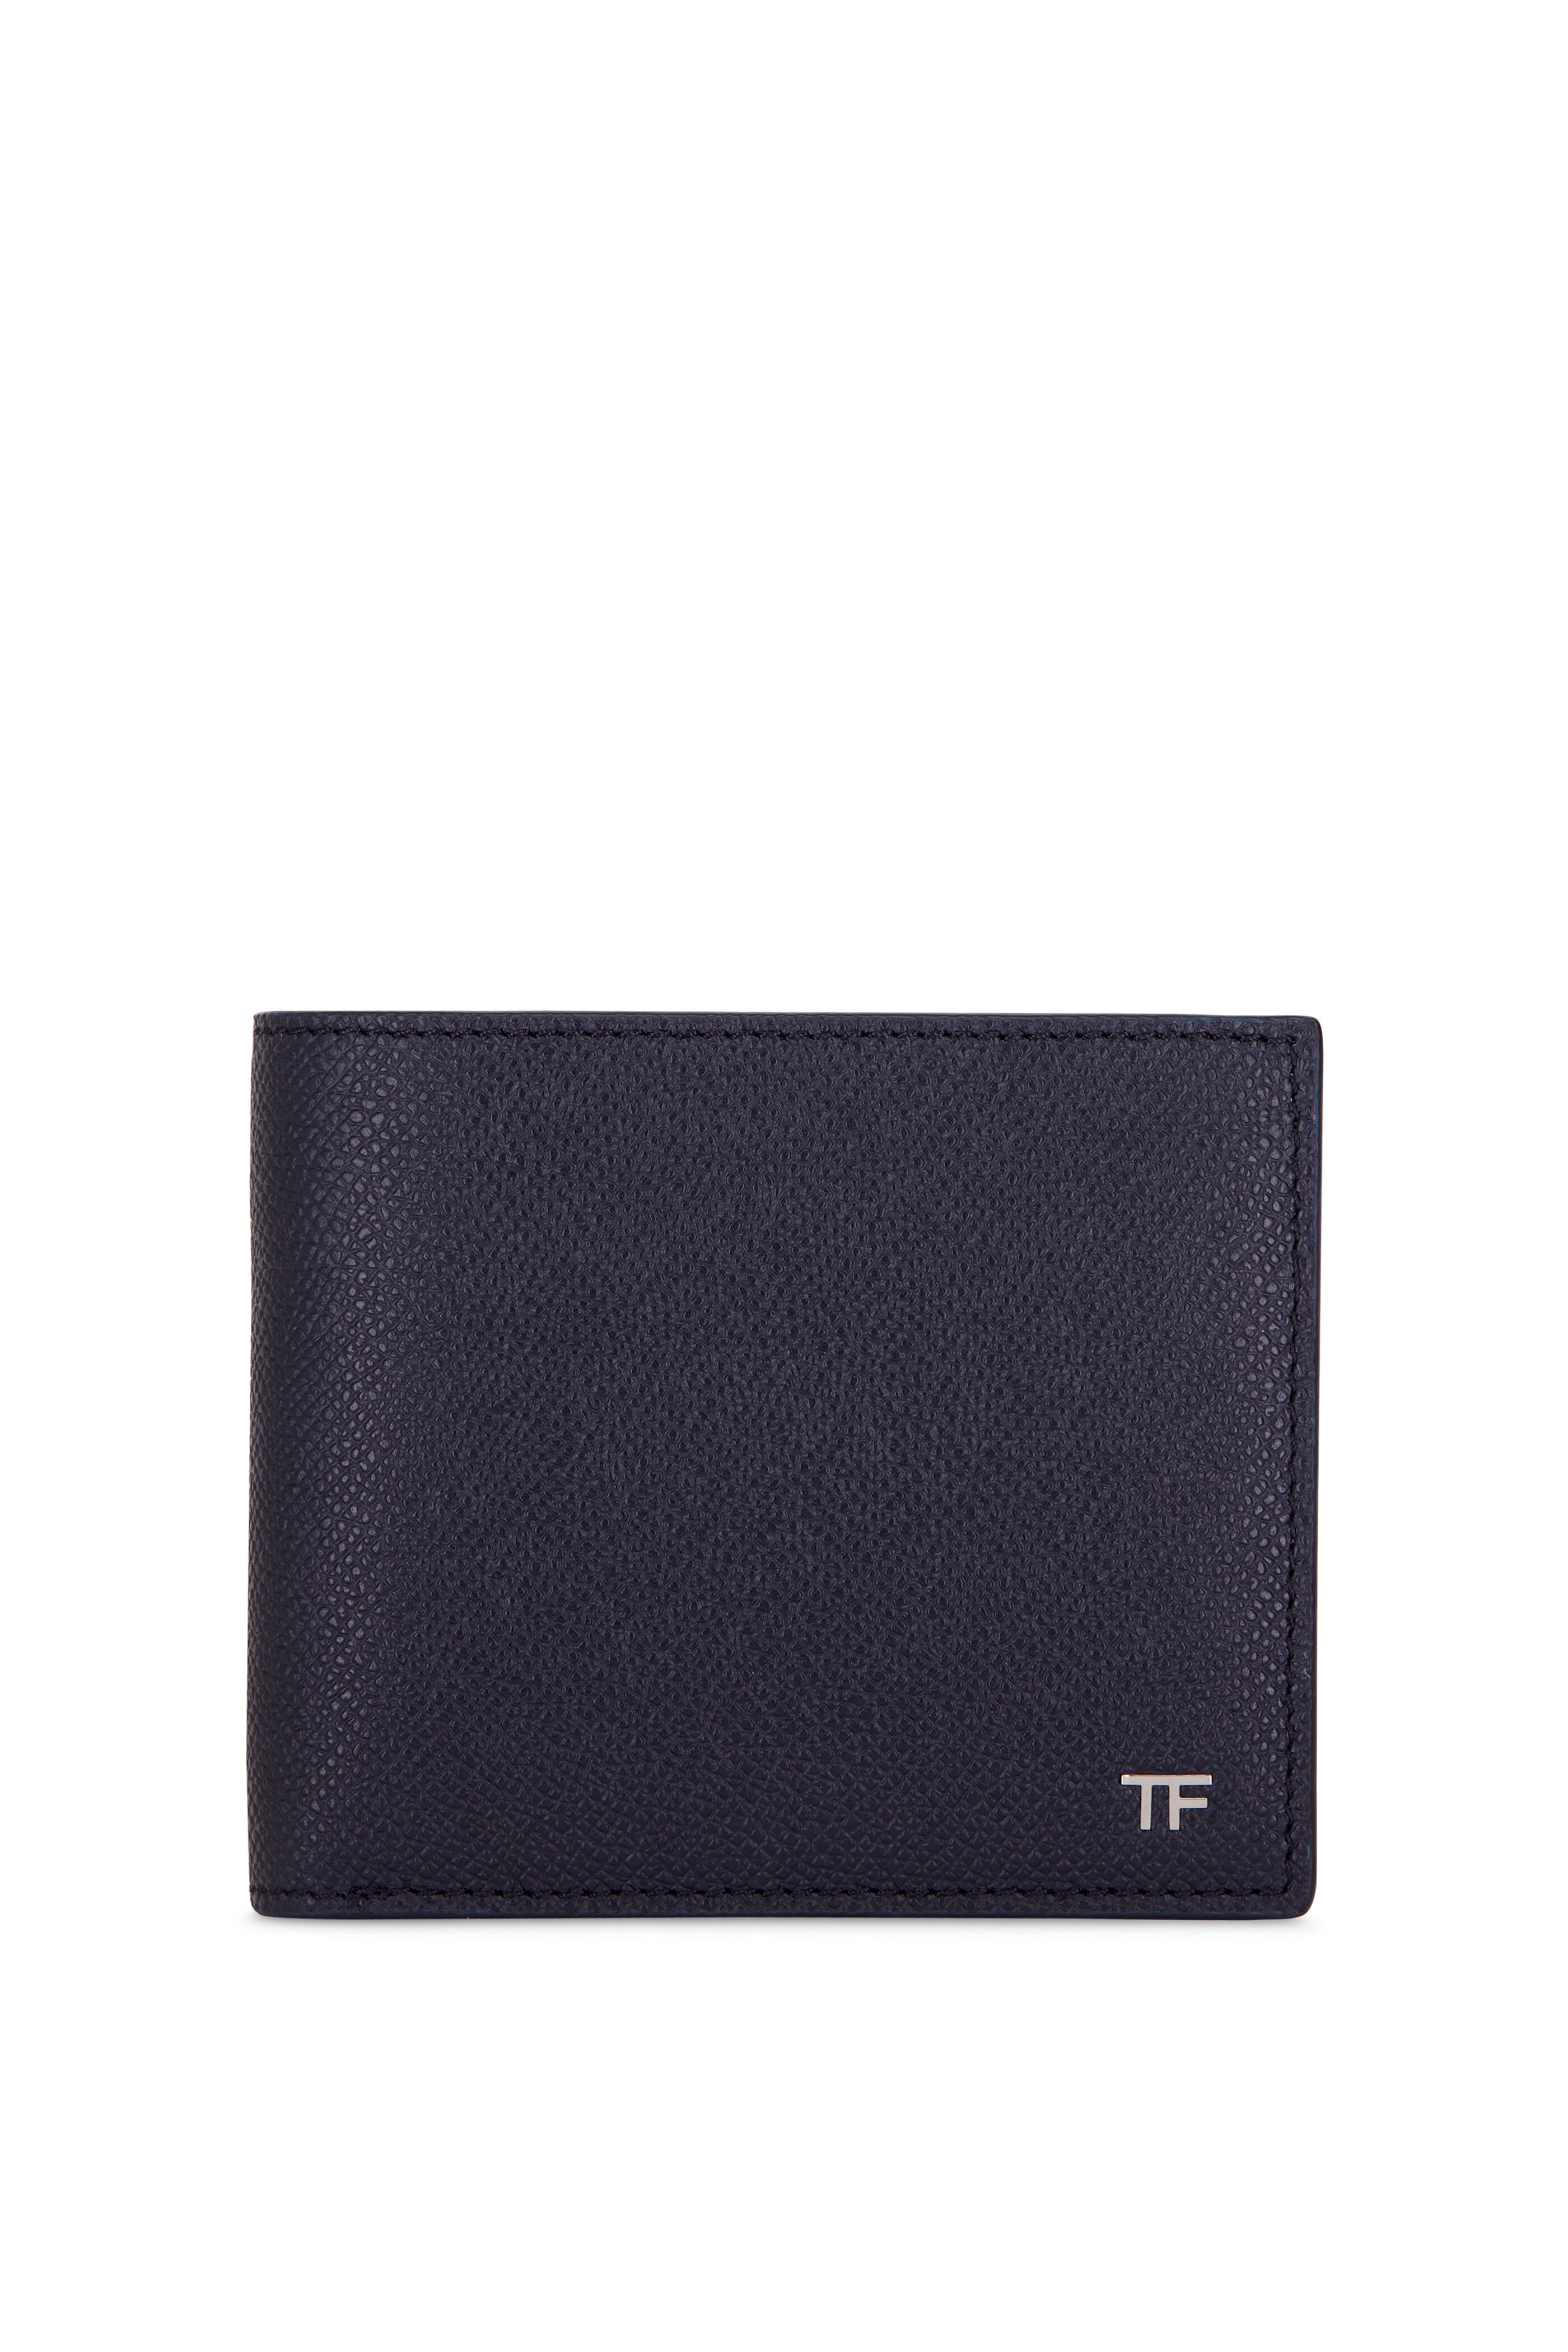 Tom Ford - Midnight Blue Grained Leather Bi-Fold Wallet